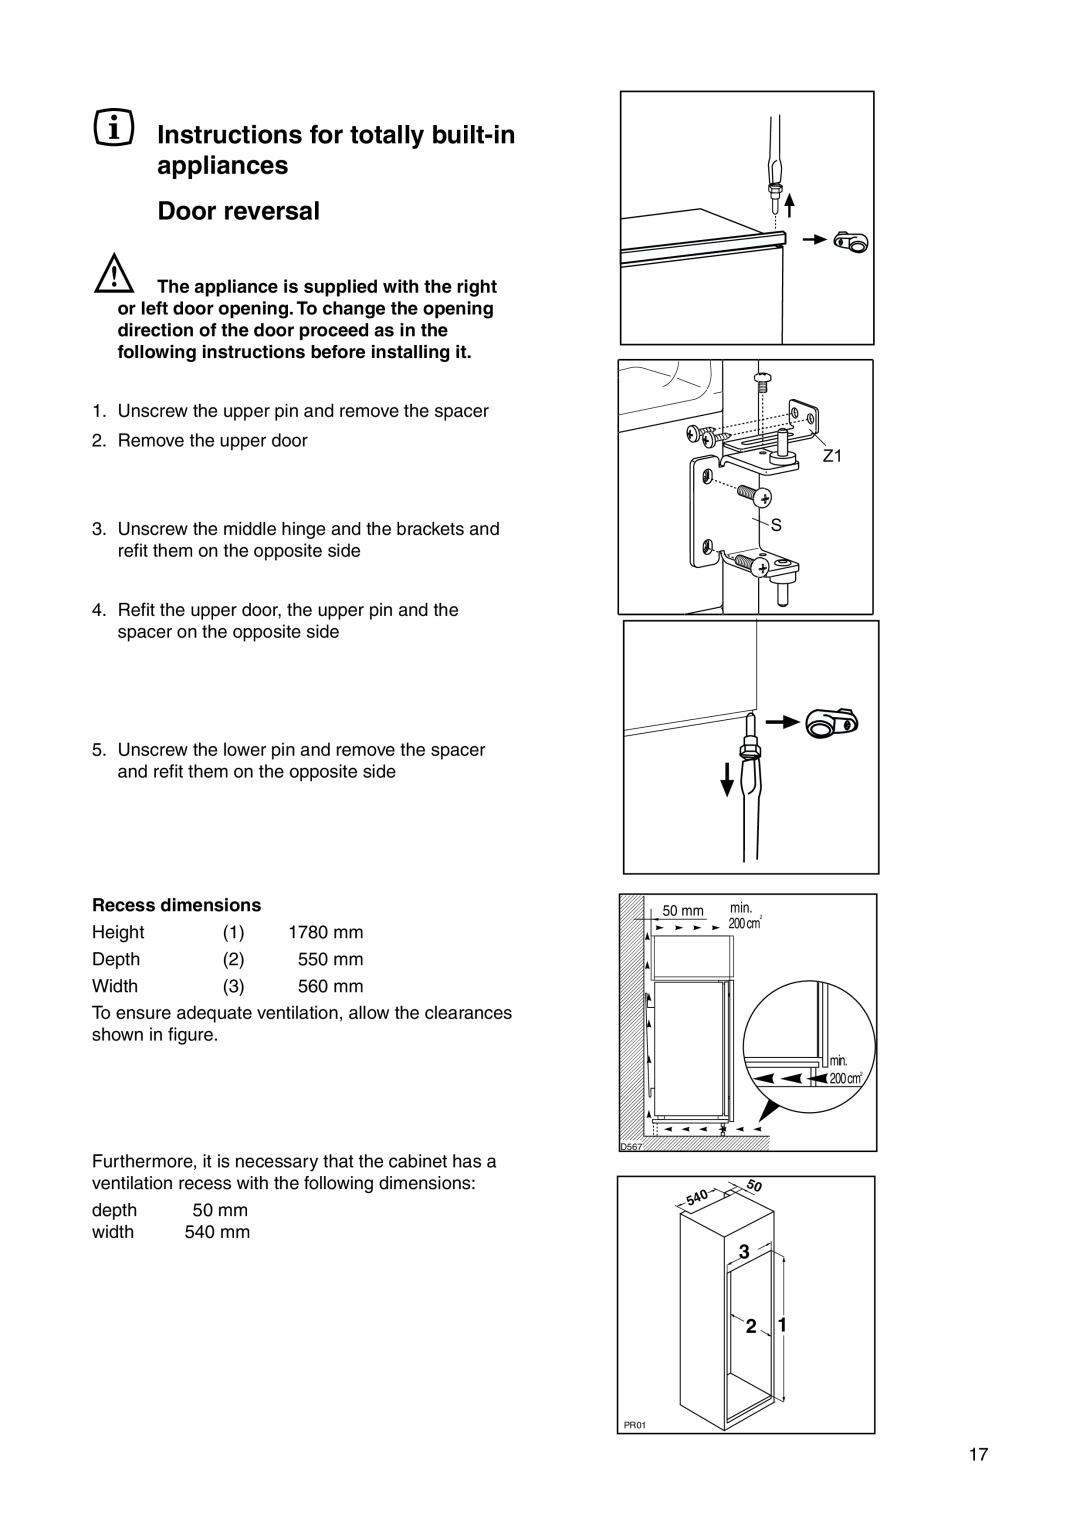 Electrolux ENN 26800 user manual Instructions for totally built-in appliances Door reversal, Z1 S, Recess dimensions 